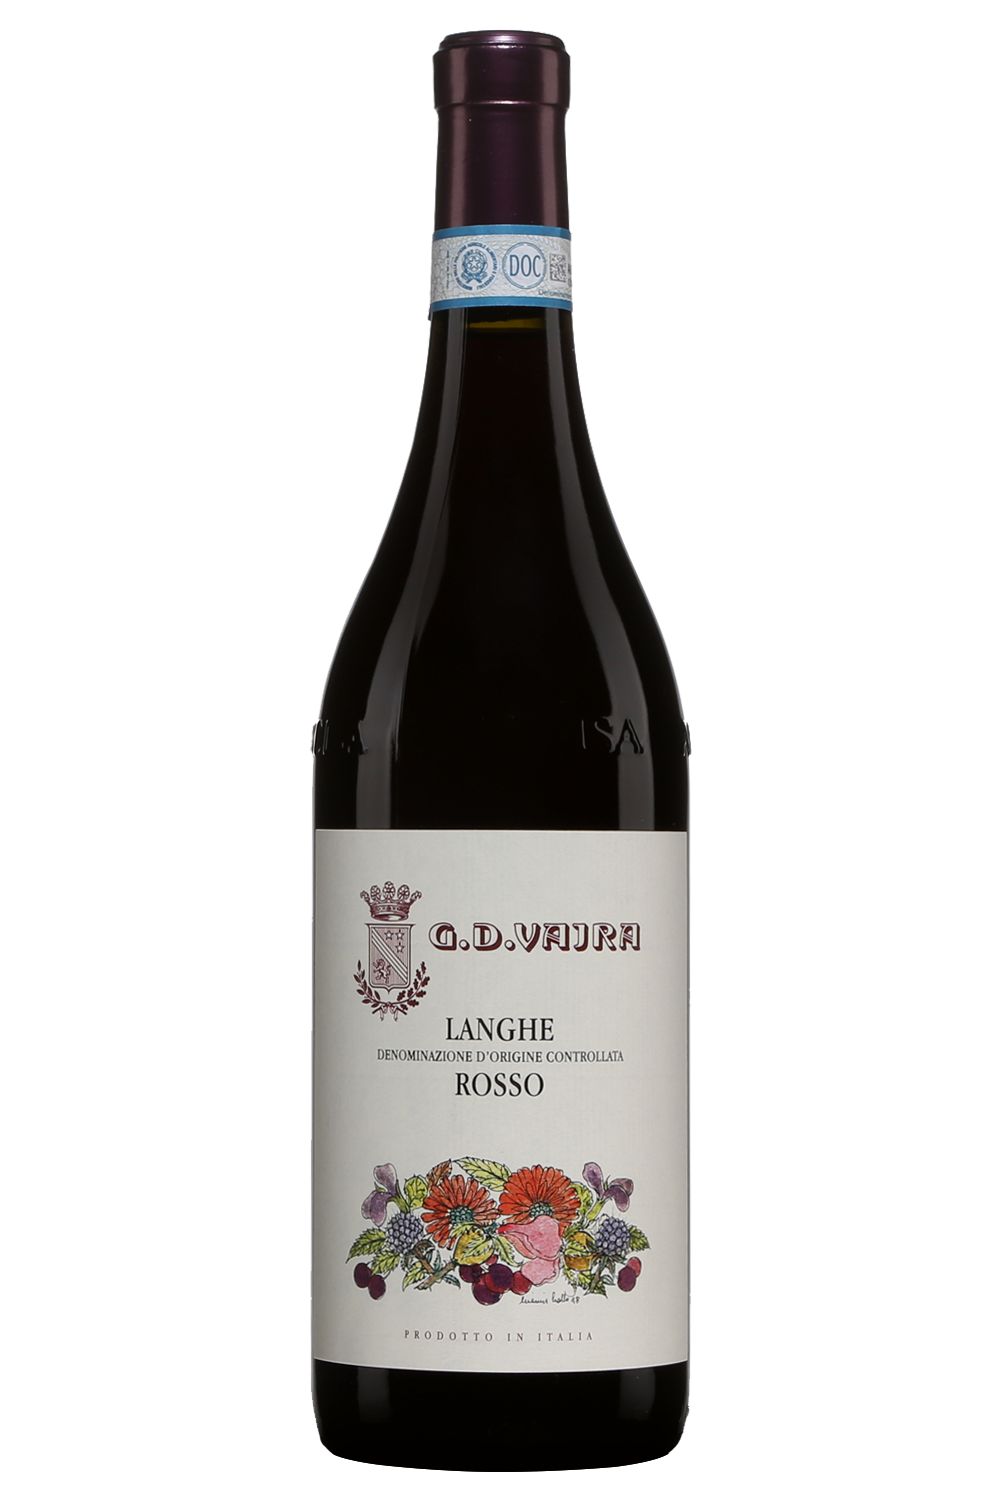 langhe rosso